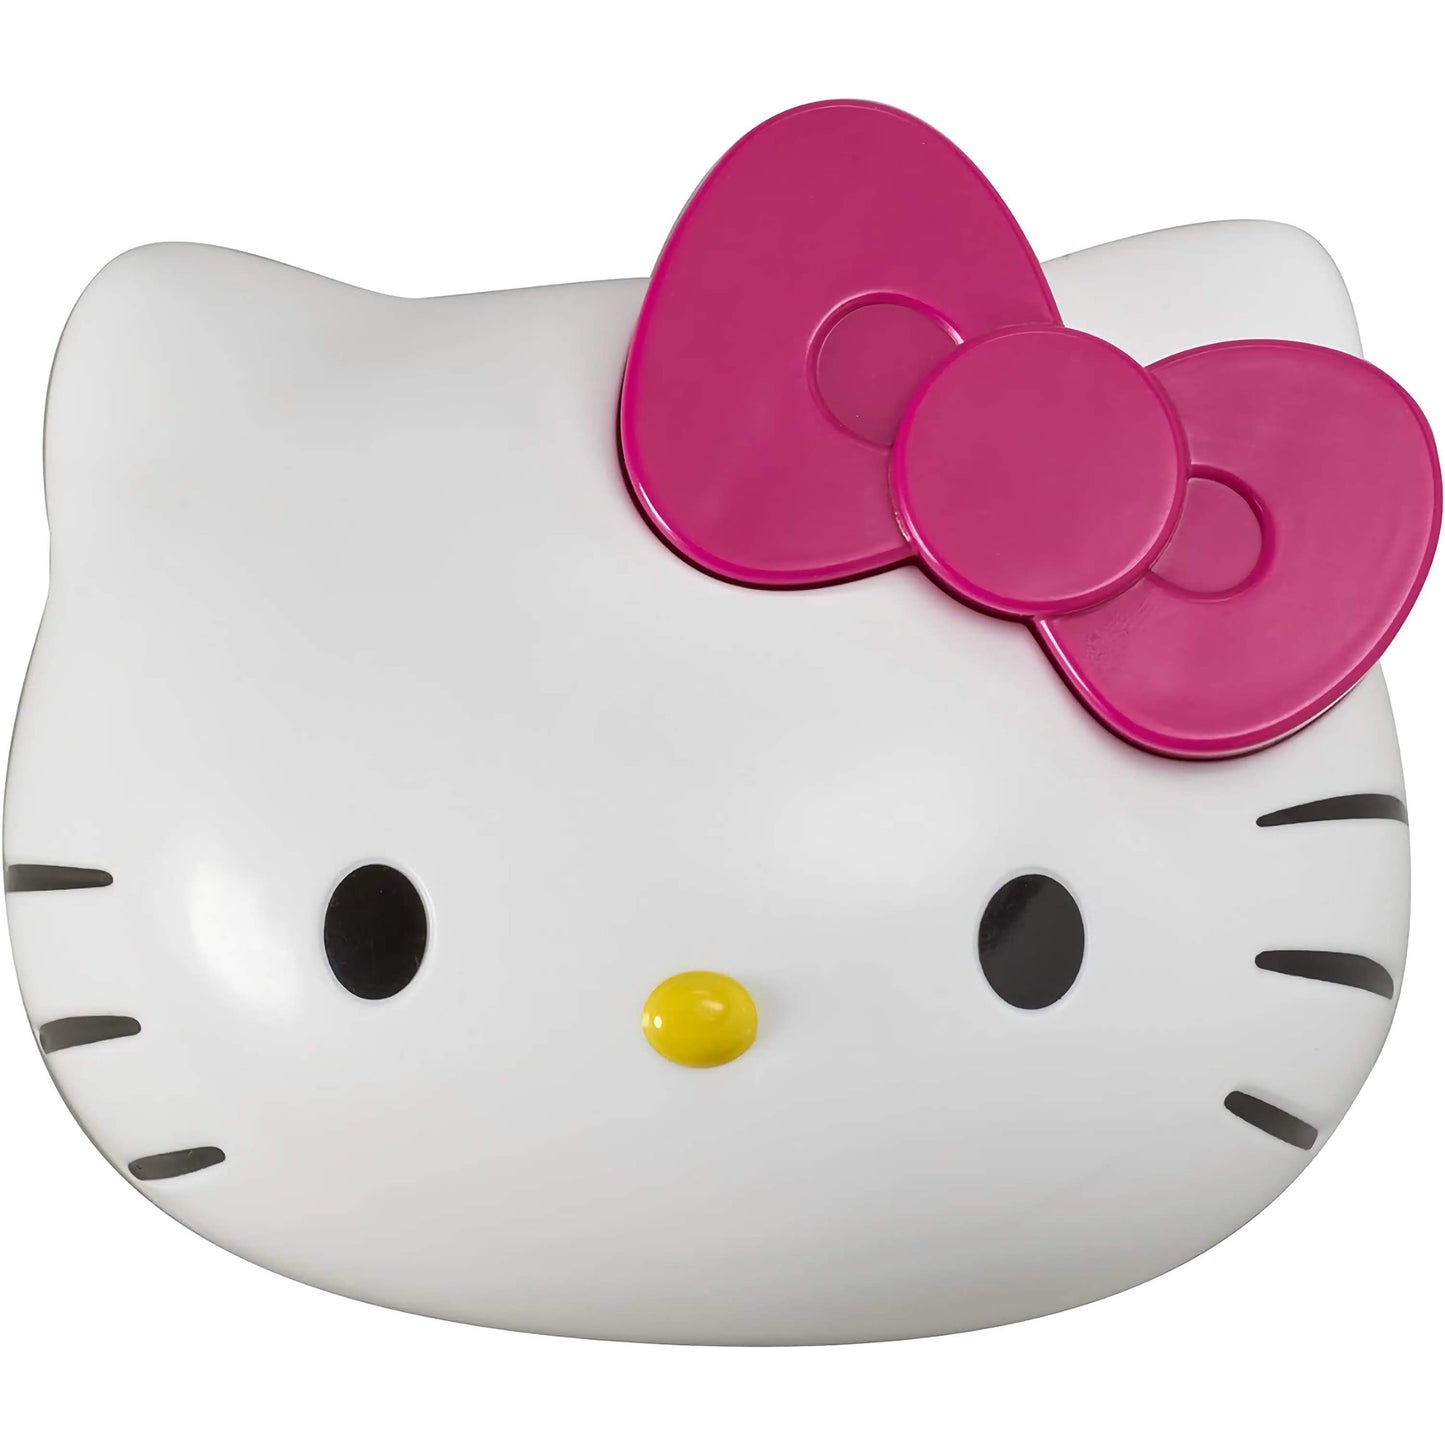 Hello Kitty Cake Topper with Surprise Toy Set Decopac